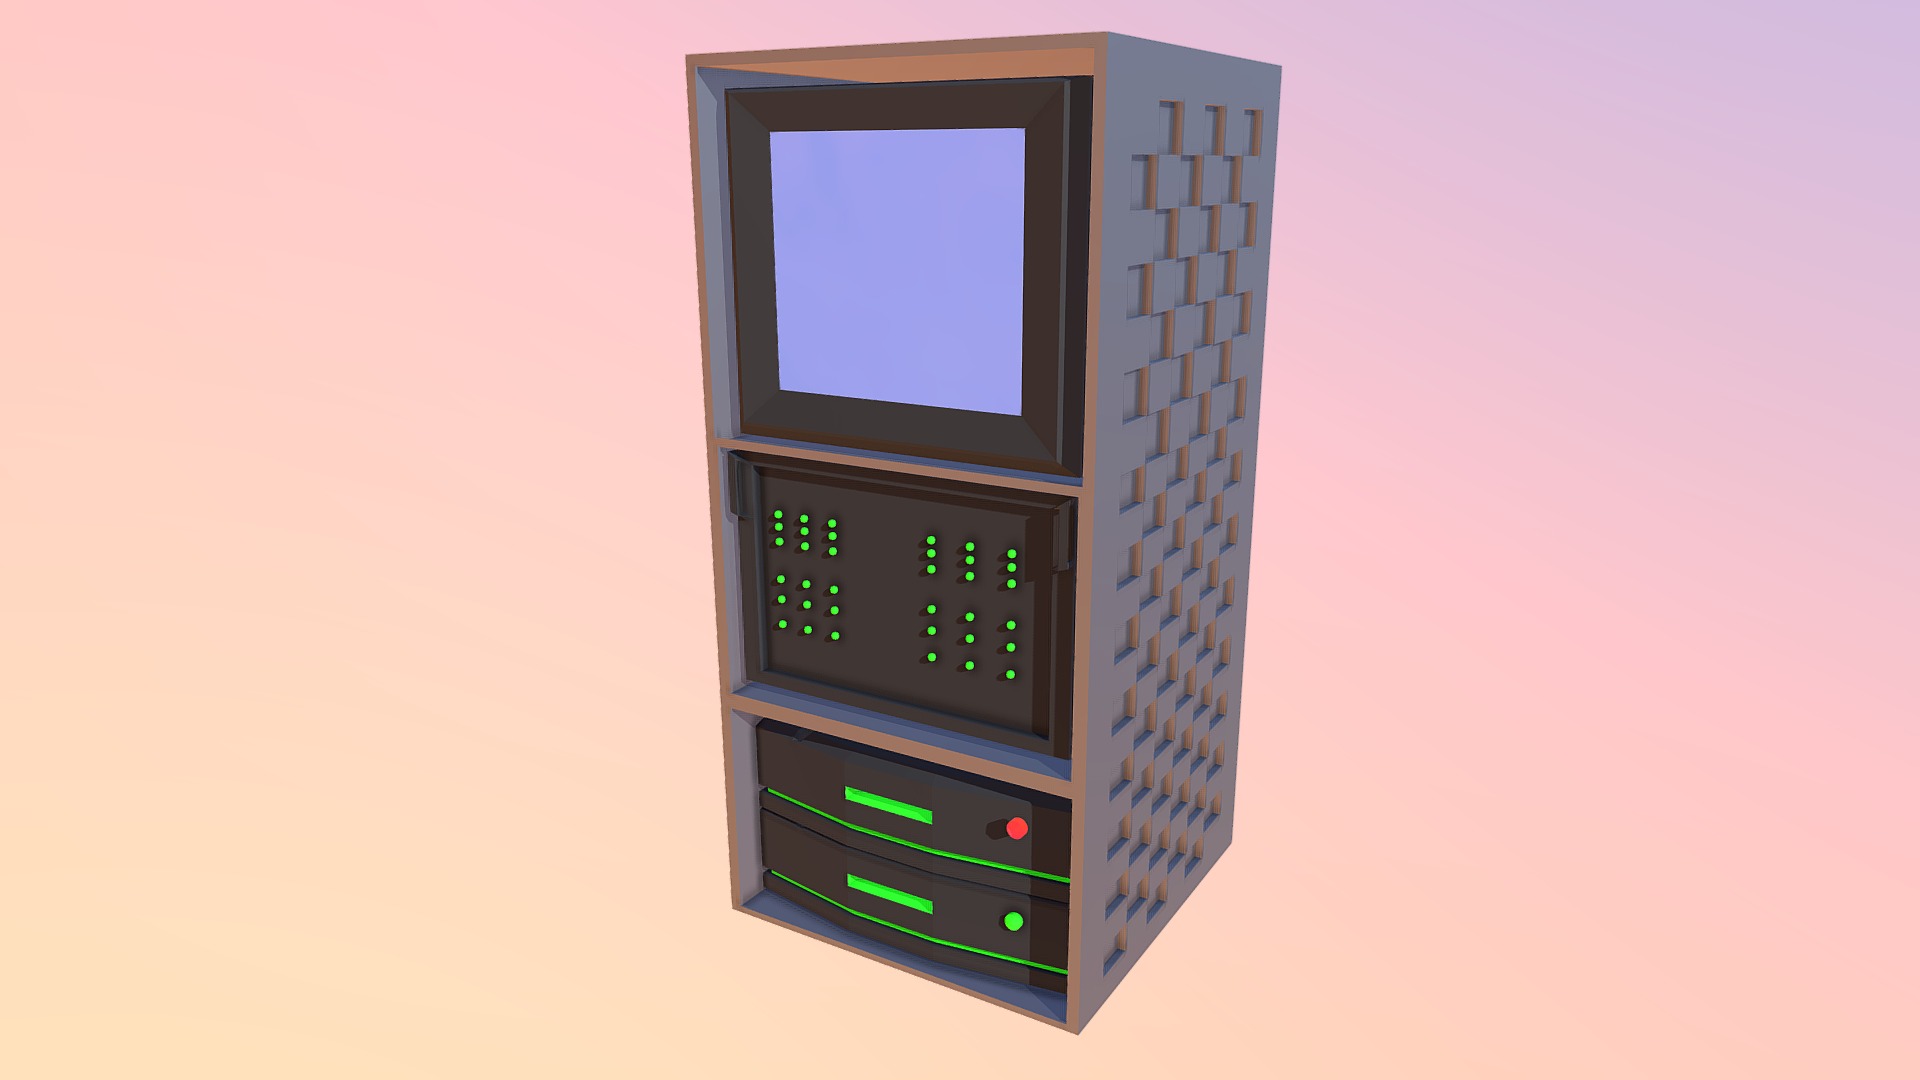 3D model SWGZ- Server - This is a 3D model of the SWGZ- Server. The 3D model is about a computer tower with a keyboard.